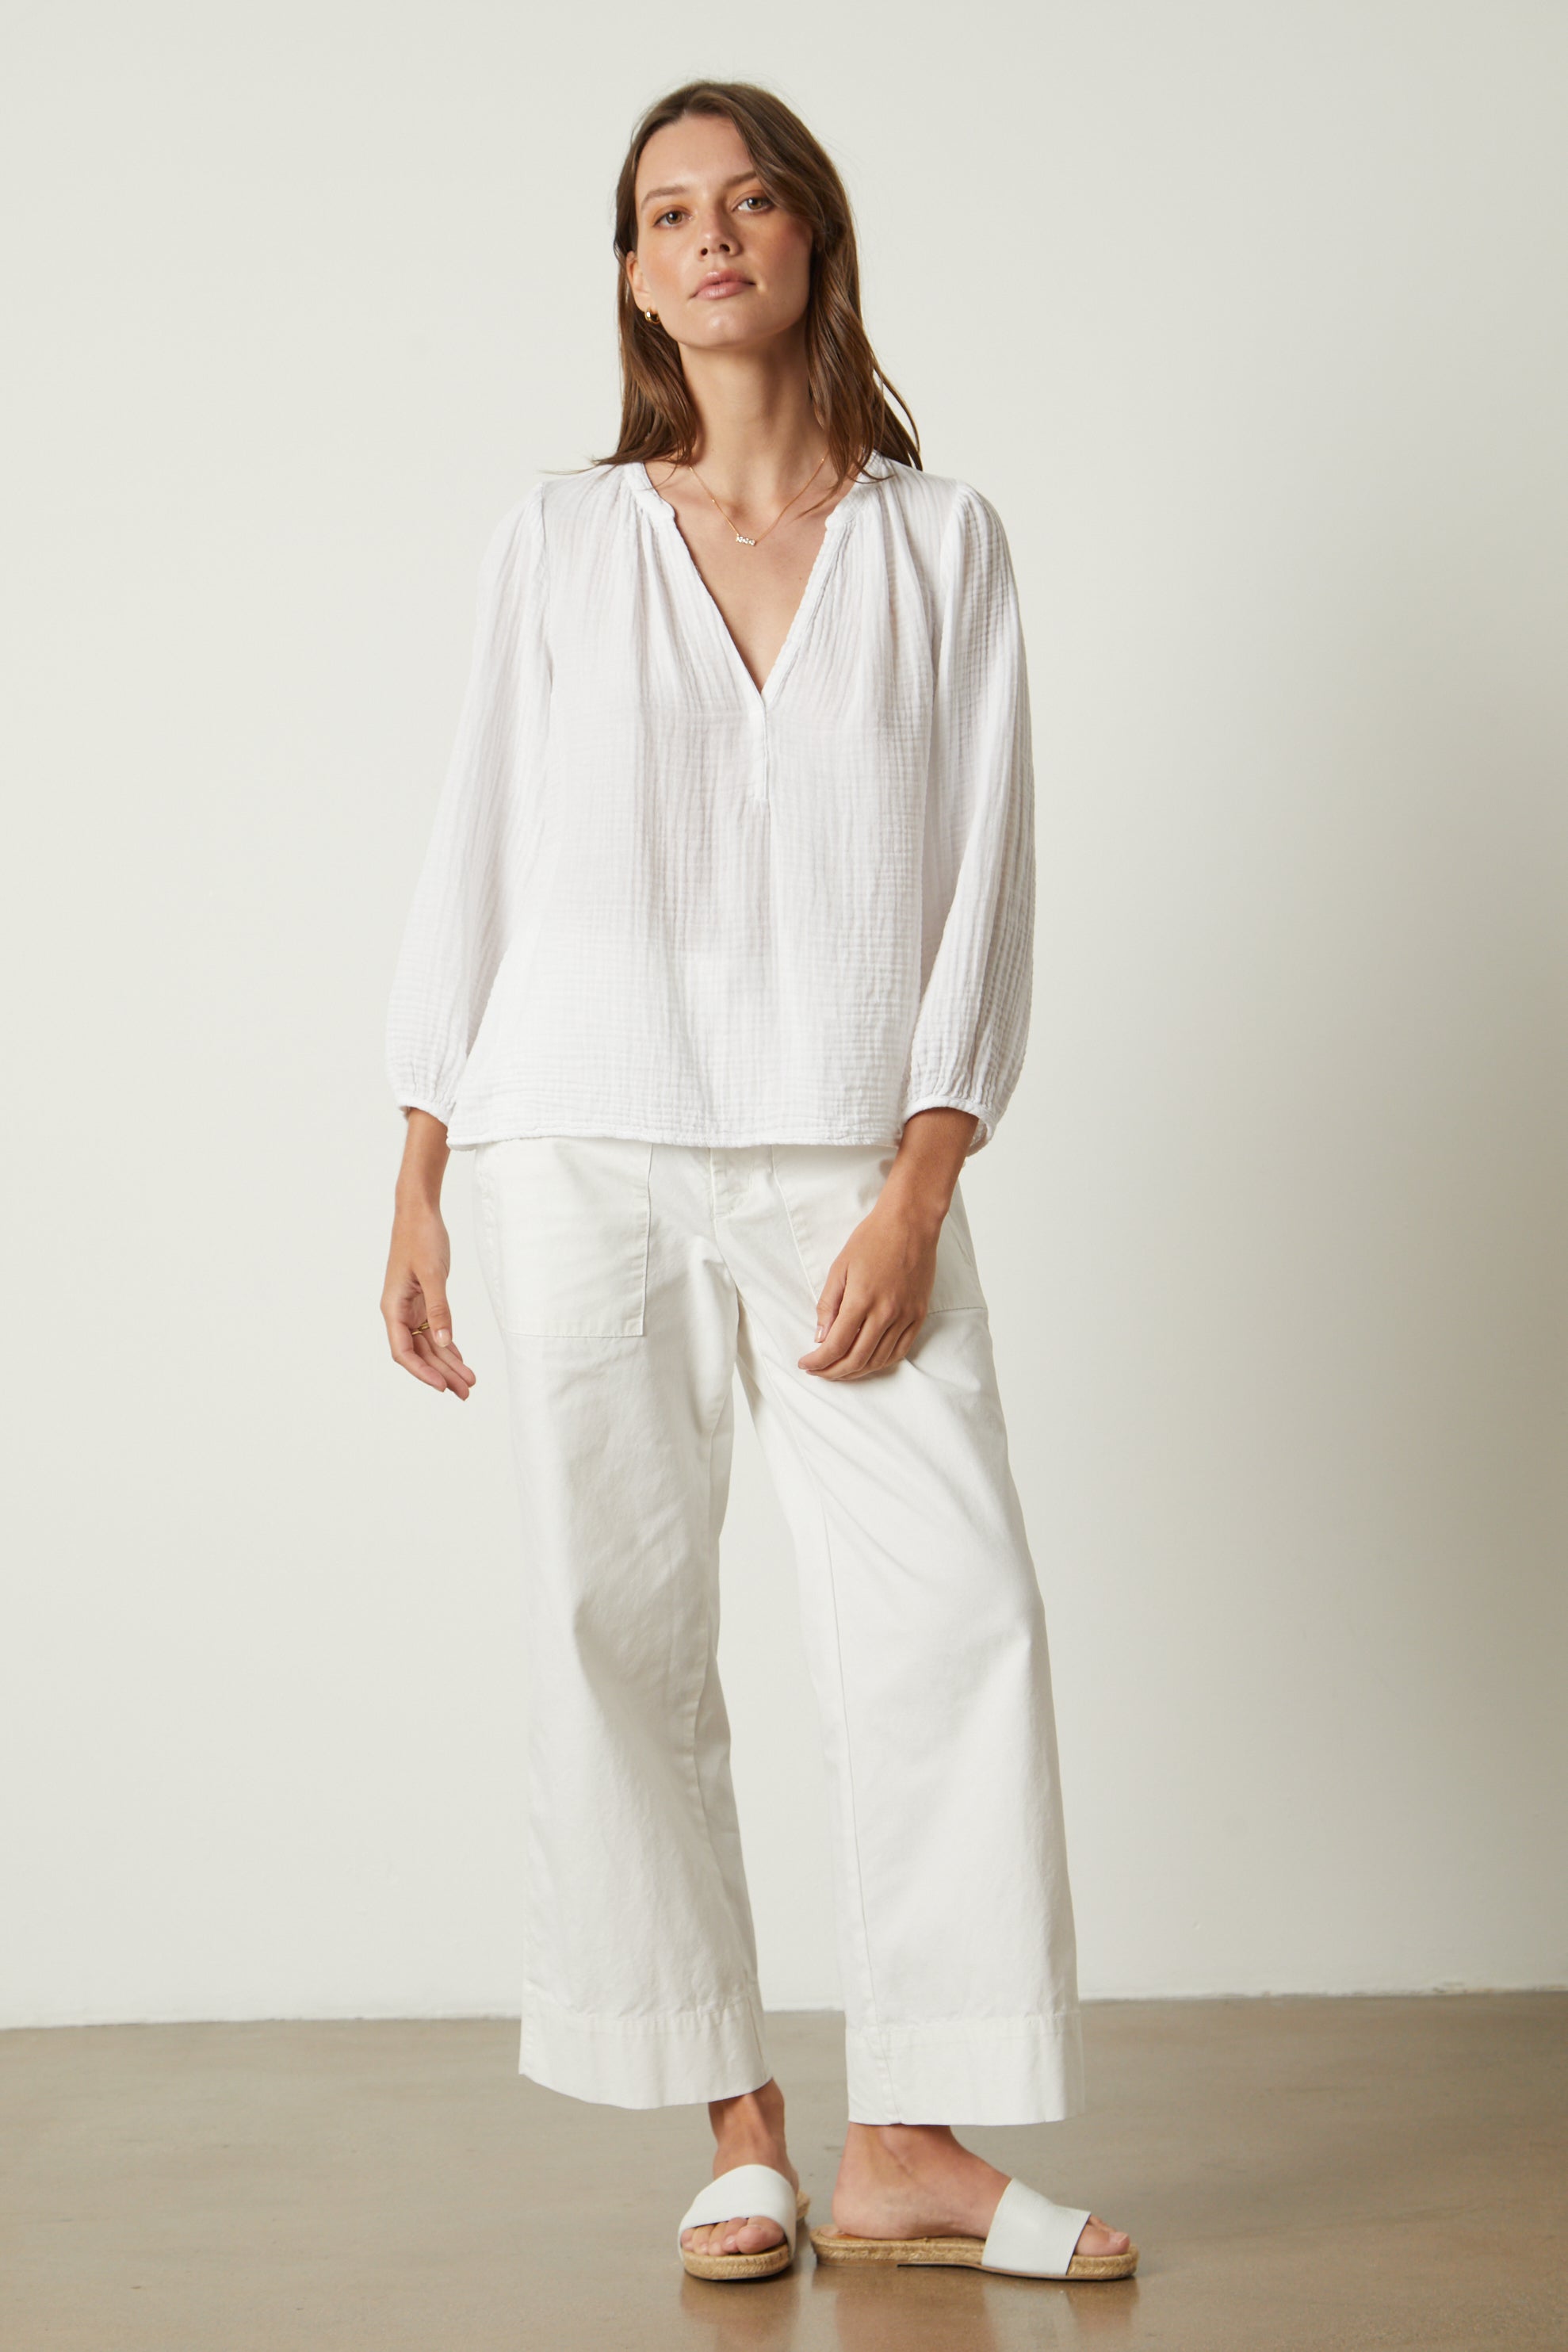   The model is wearing a white MAGGIE COTTON GAUZE V-NECK TOP blouse and white wide leg pants. (Brand Name: Velvet by Graham & Spencer) 